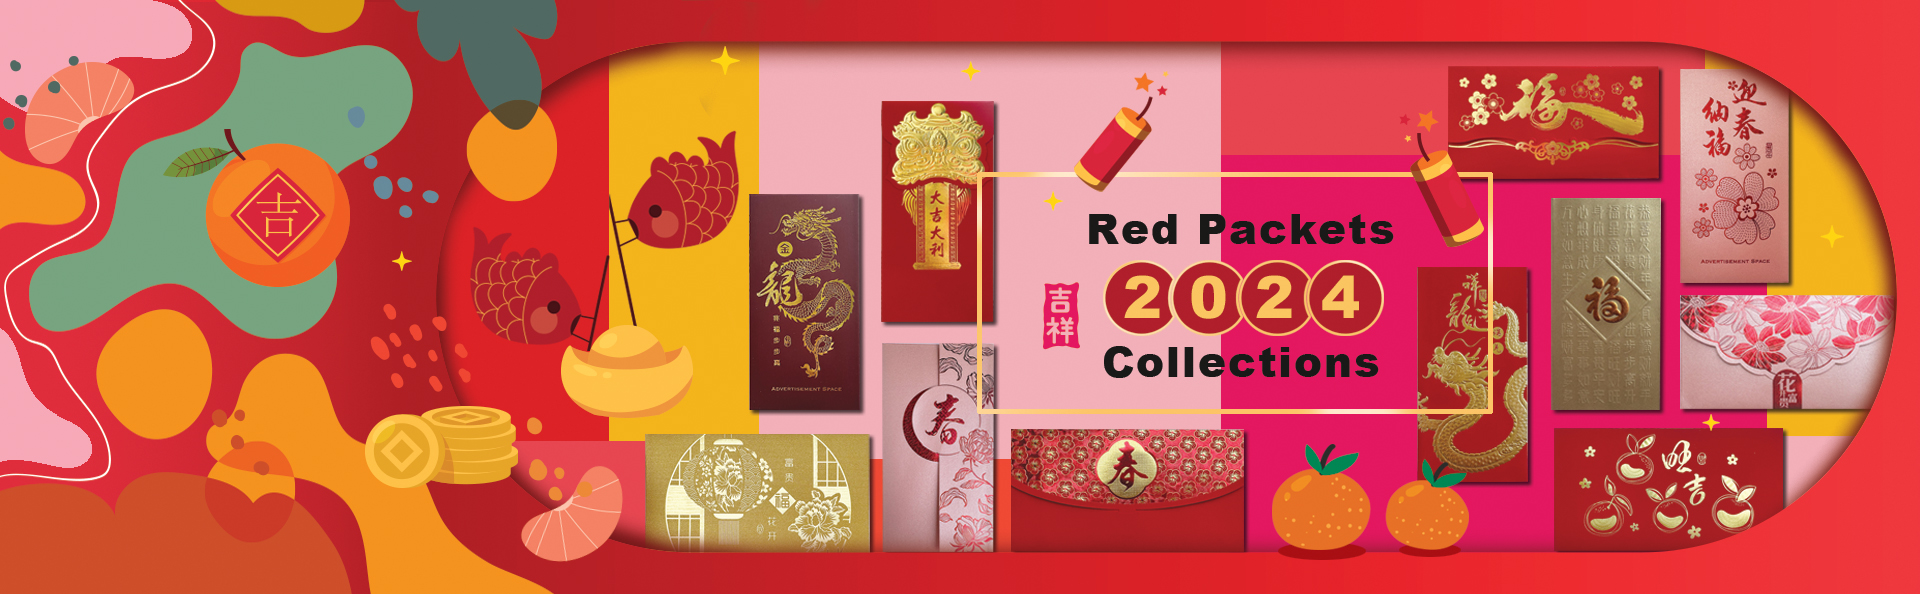 2024 website cover red packet